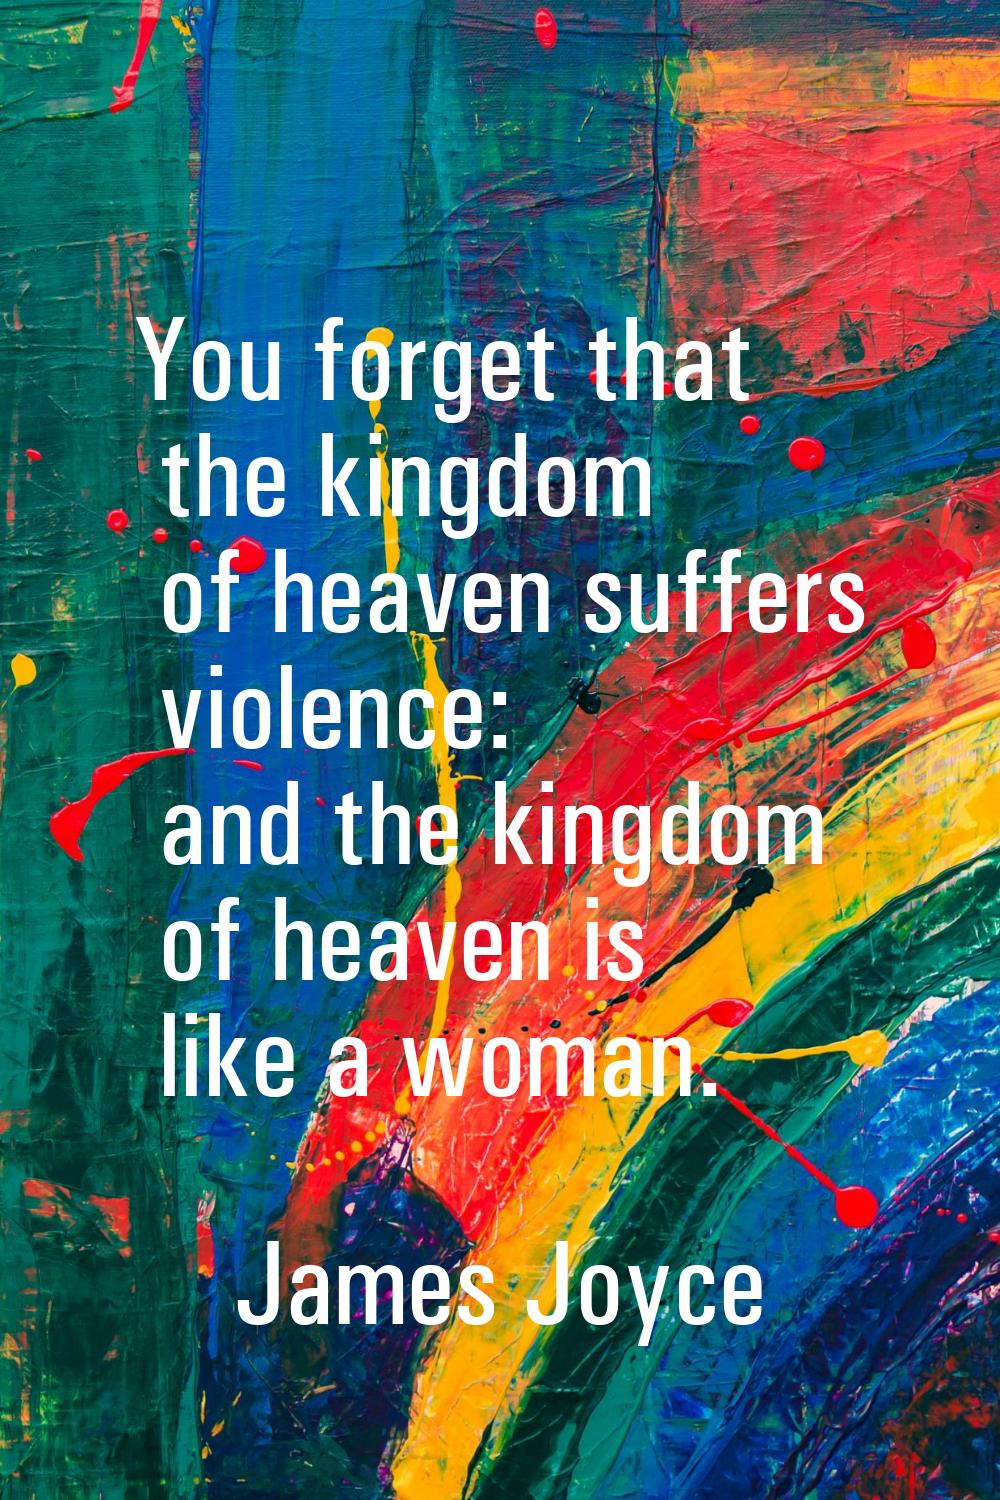 You forget that the kingdom of heaven suffers violence: and the kingdom of heaven is like a woman.